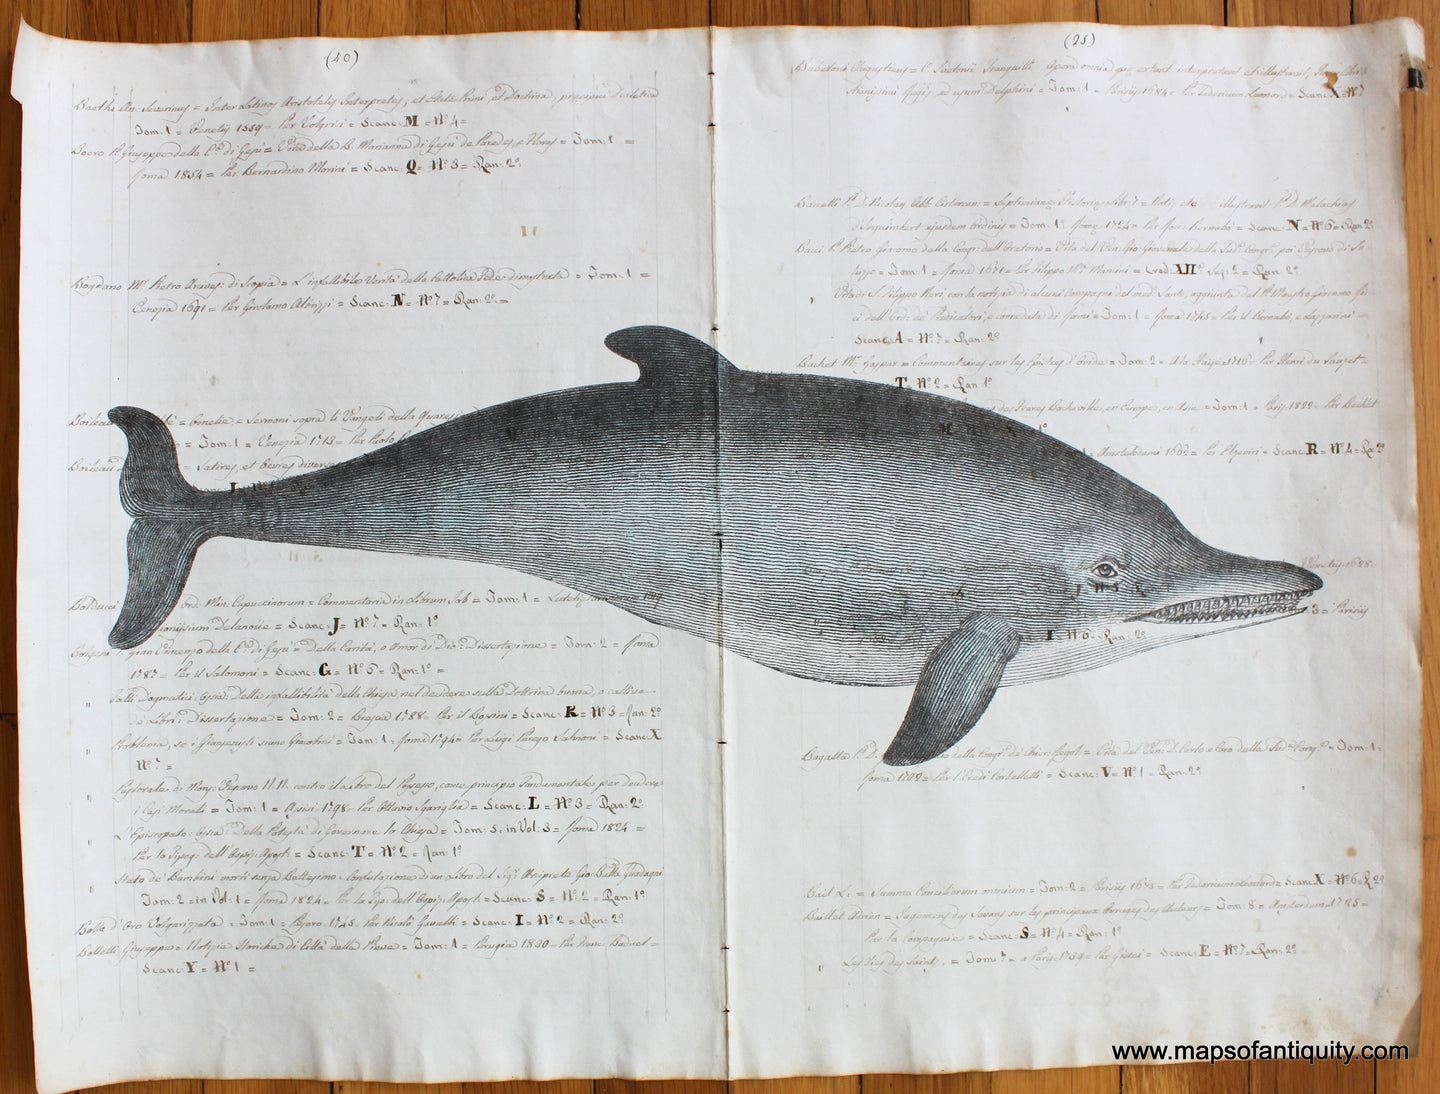 Digitally-Engraved-Specialty-Reproductions-Antique-Ledger-Paper-Dolphin-Dolphins-Print-Prints-Maps-of-Antiquity